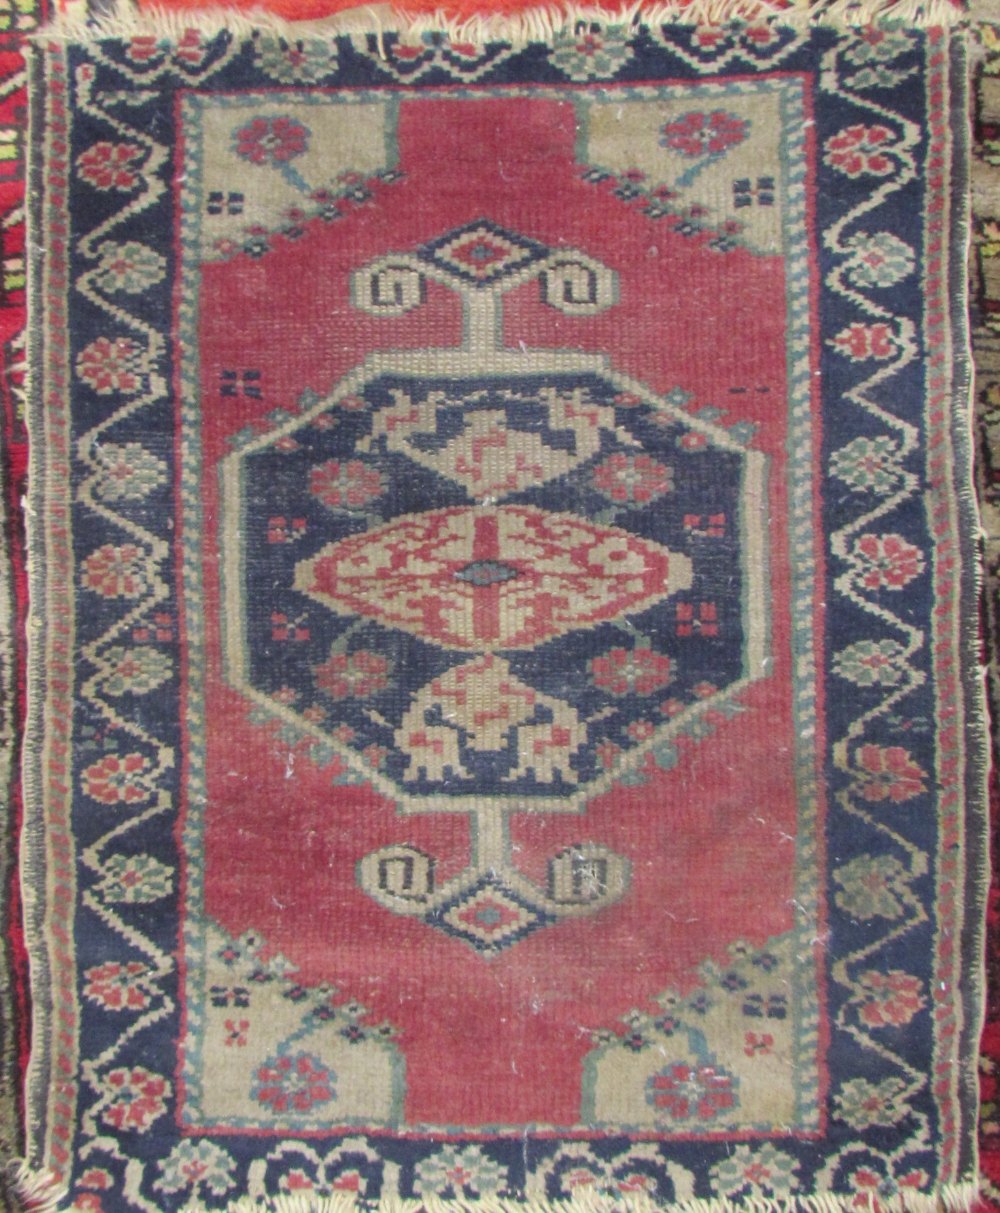 A red ground runner with a geometric design together with a prayer rug with central mihrab and a - Image 2 of 3